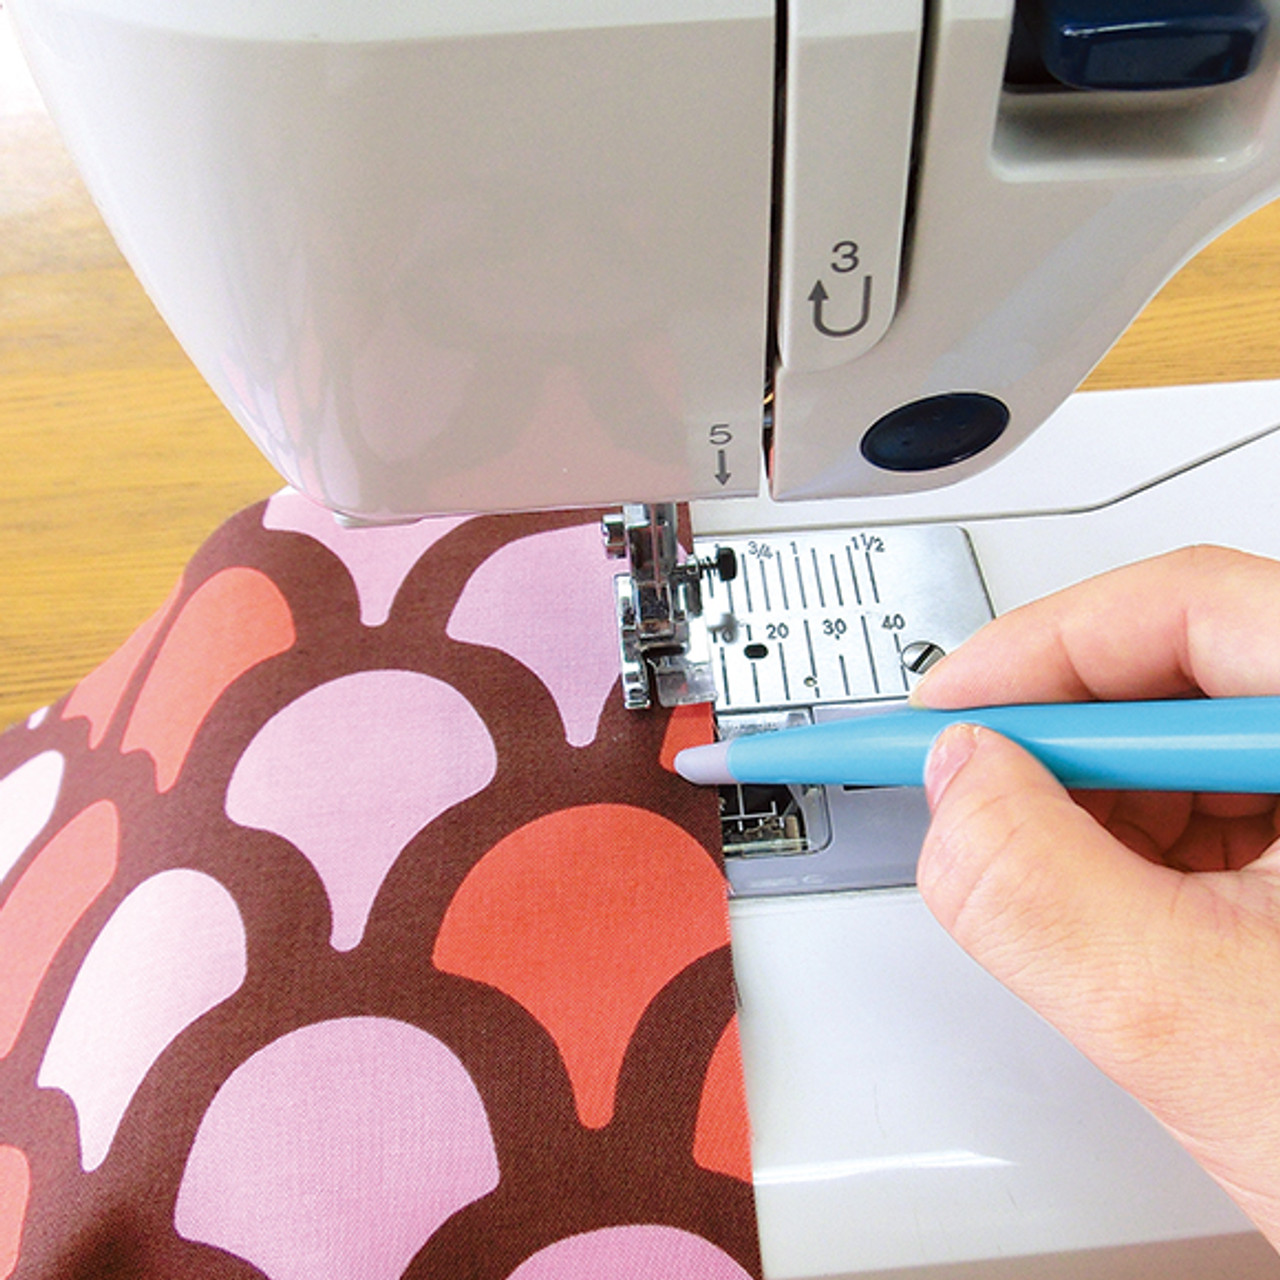 Clover Hold-It Precise Stiletto in use while sewing